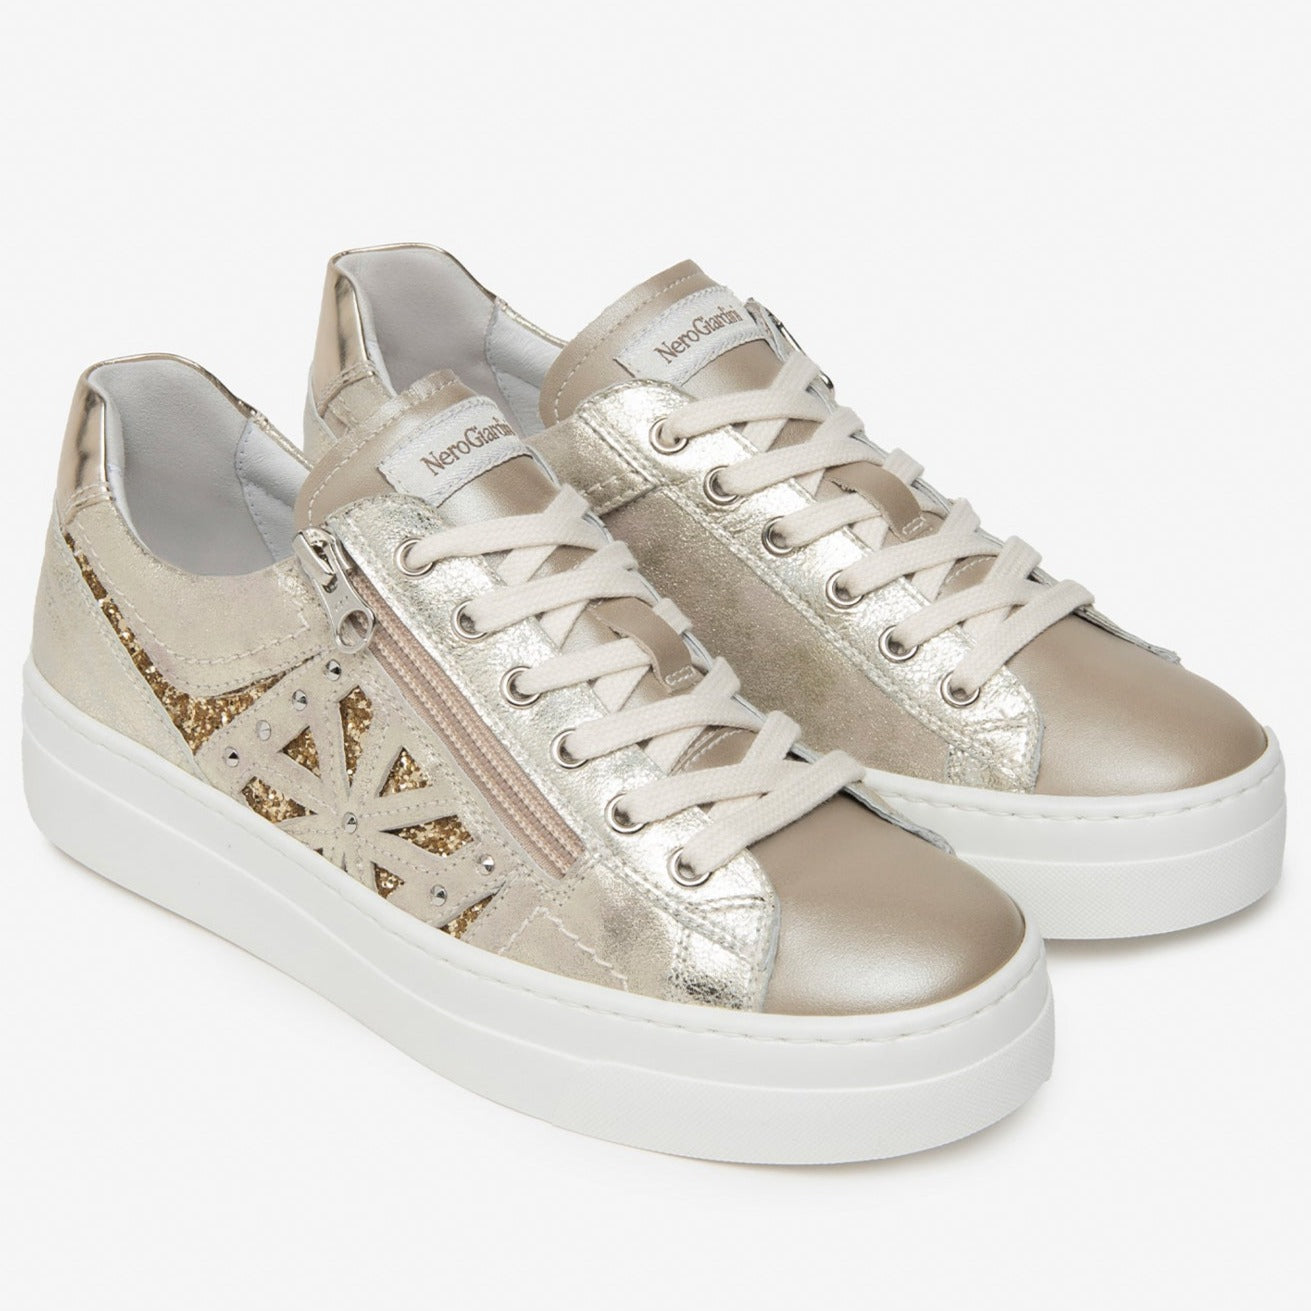 Sneakers NeroGiardini woman gold leather glitter inserts with zip